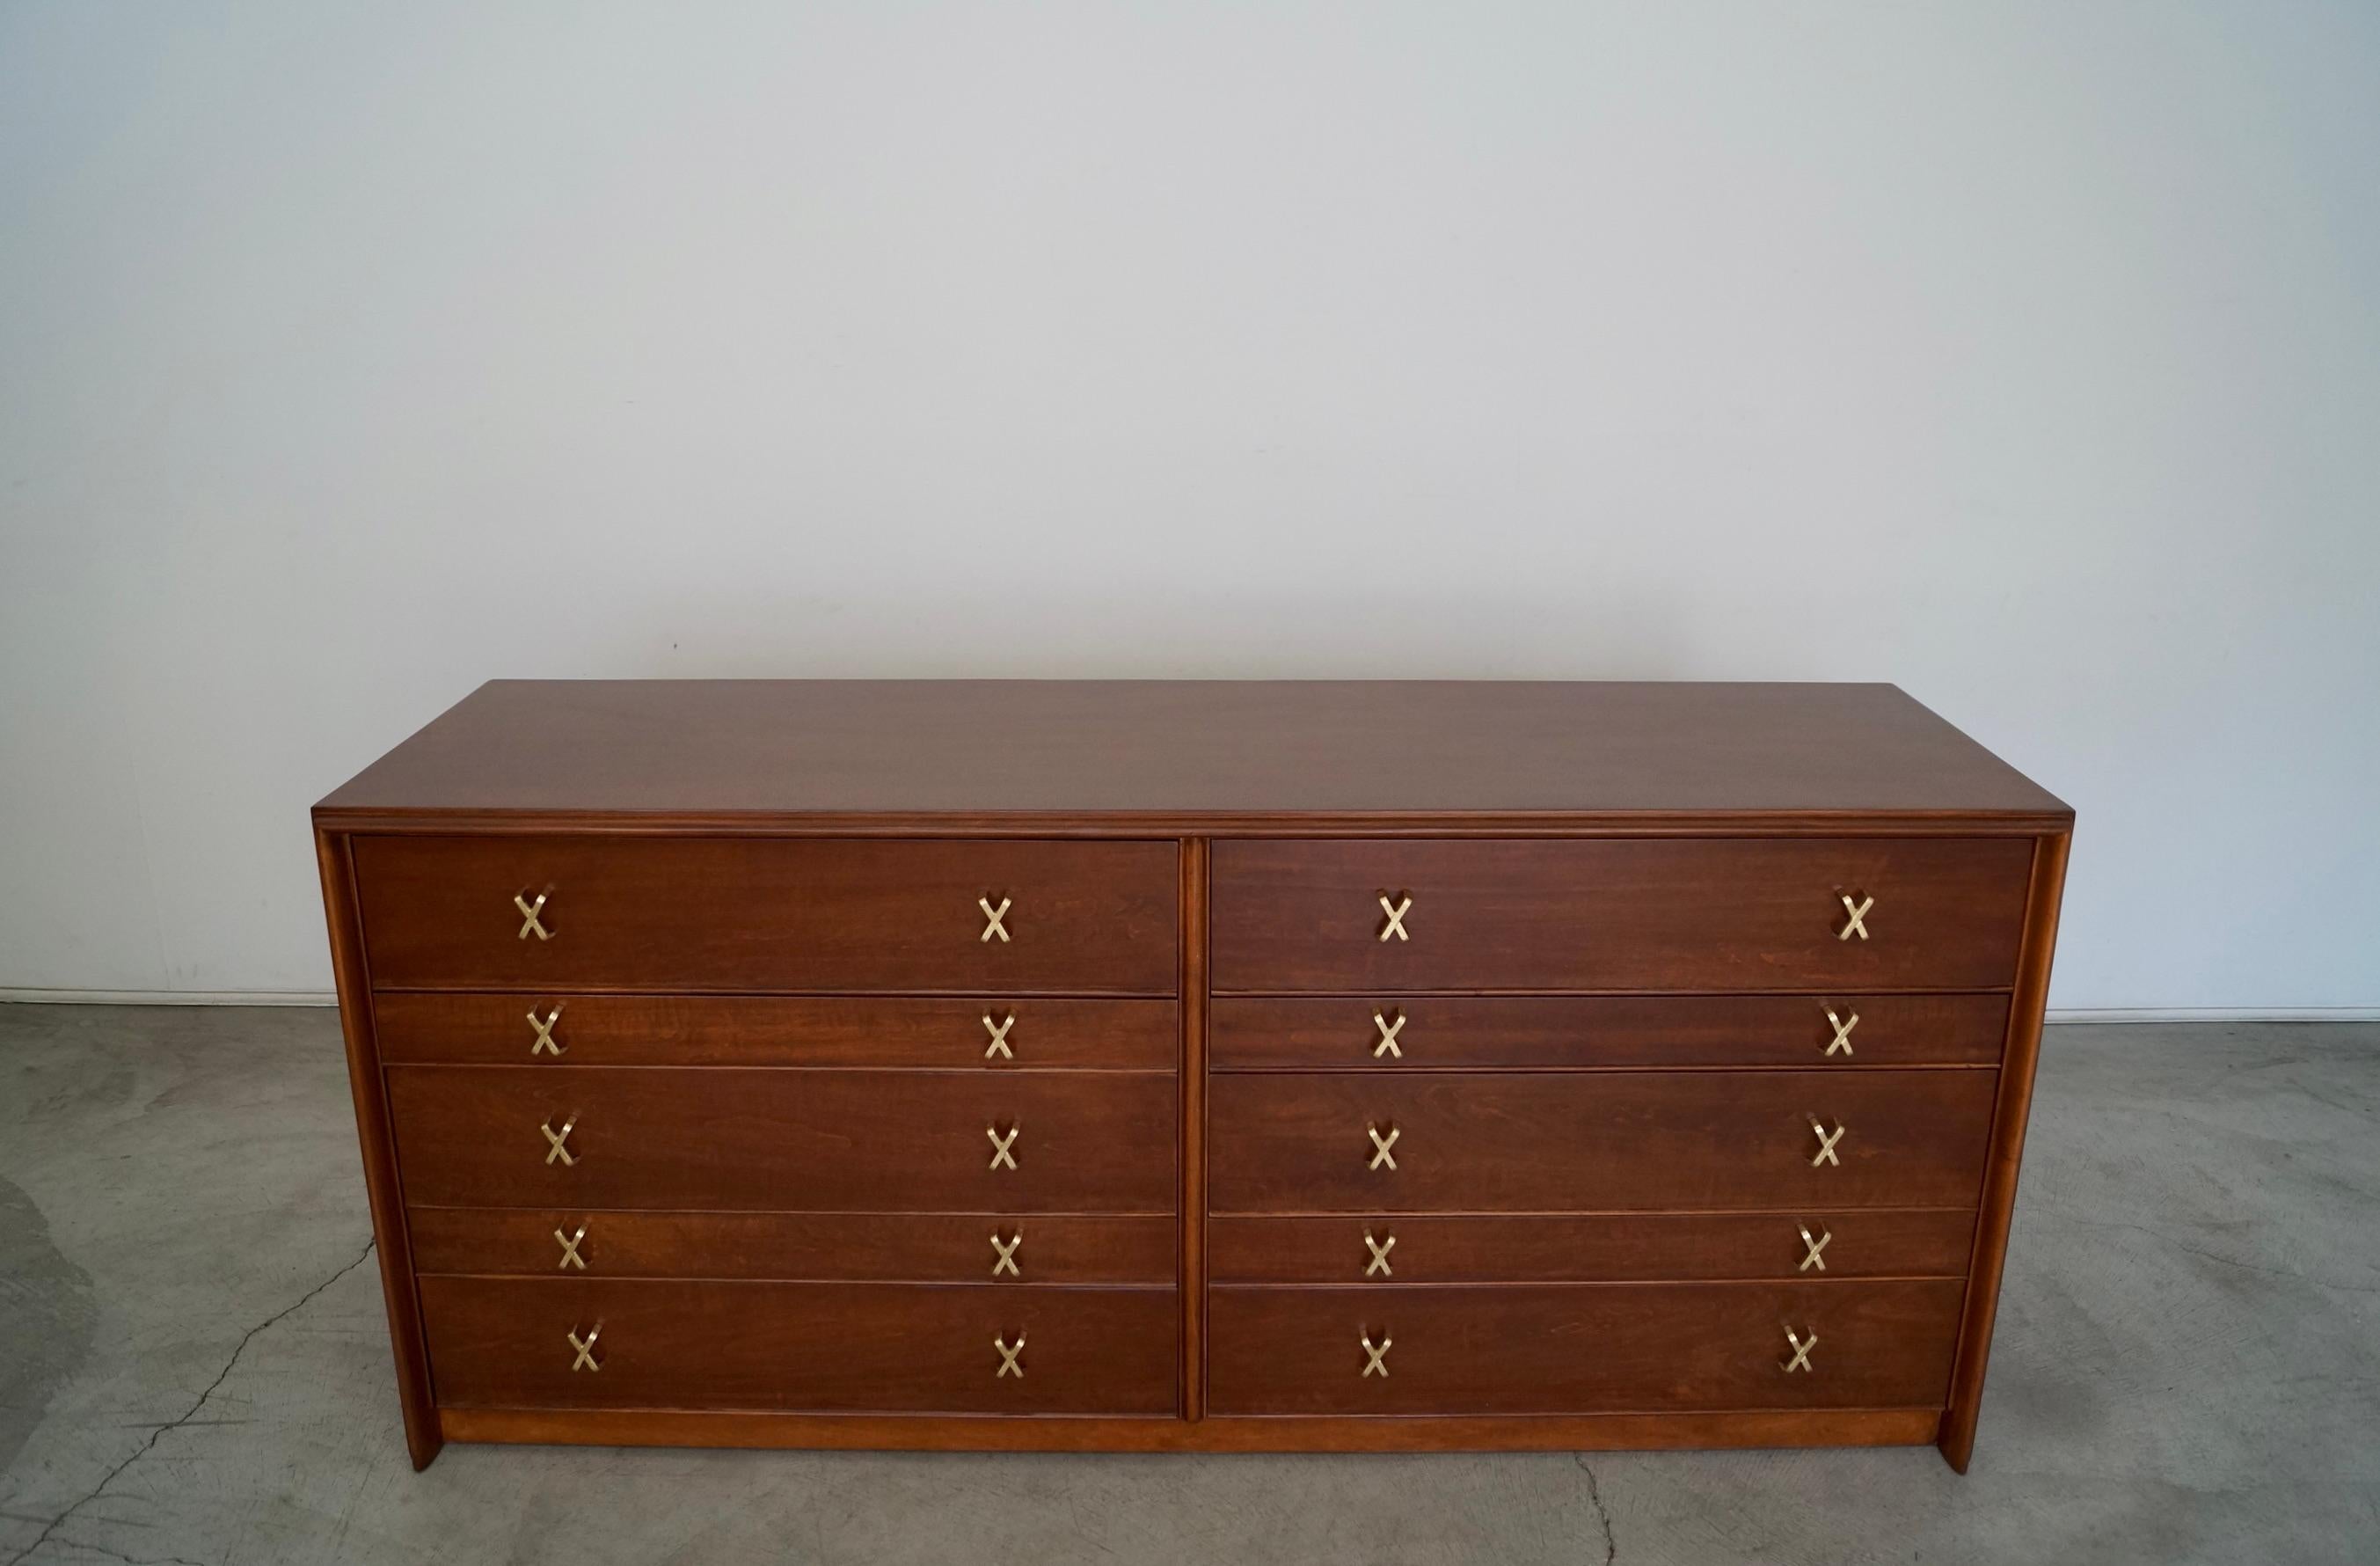 Vintage Mid-century Modern dresser for sale. Designed by Paul Frankl in the 1950's, and manufactured by the Johnson Furniture Company. This design is one of the most celebrated designs by Paul Frankl, and is iconic of his work. It has simple and